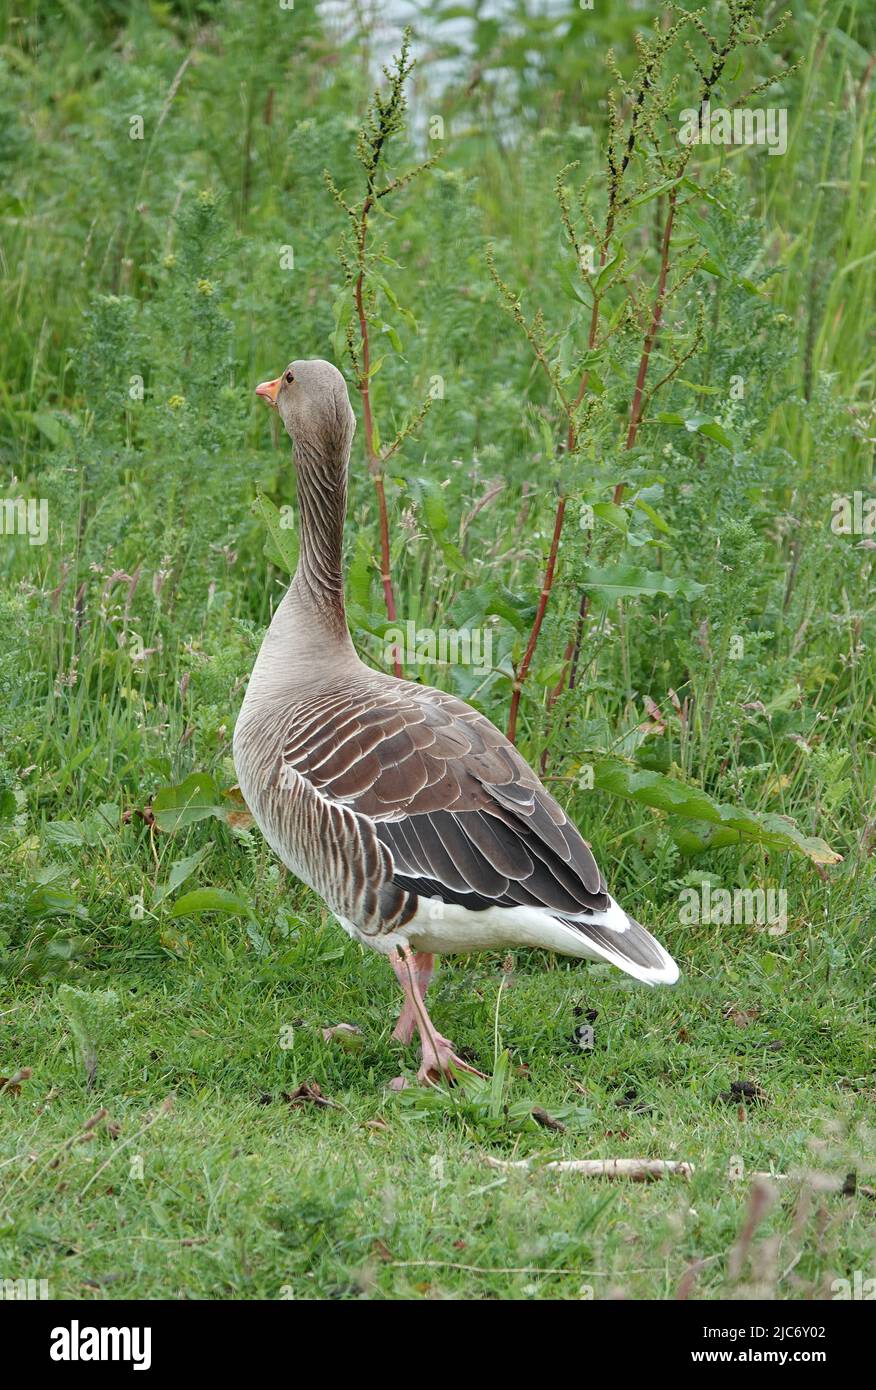 This wild Greylag goose is trying to get away unseen. Location: Hardenberg, the Netherlands Stock Photo